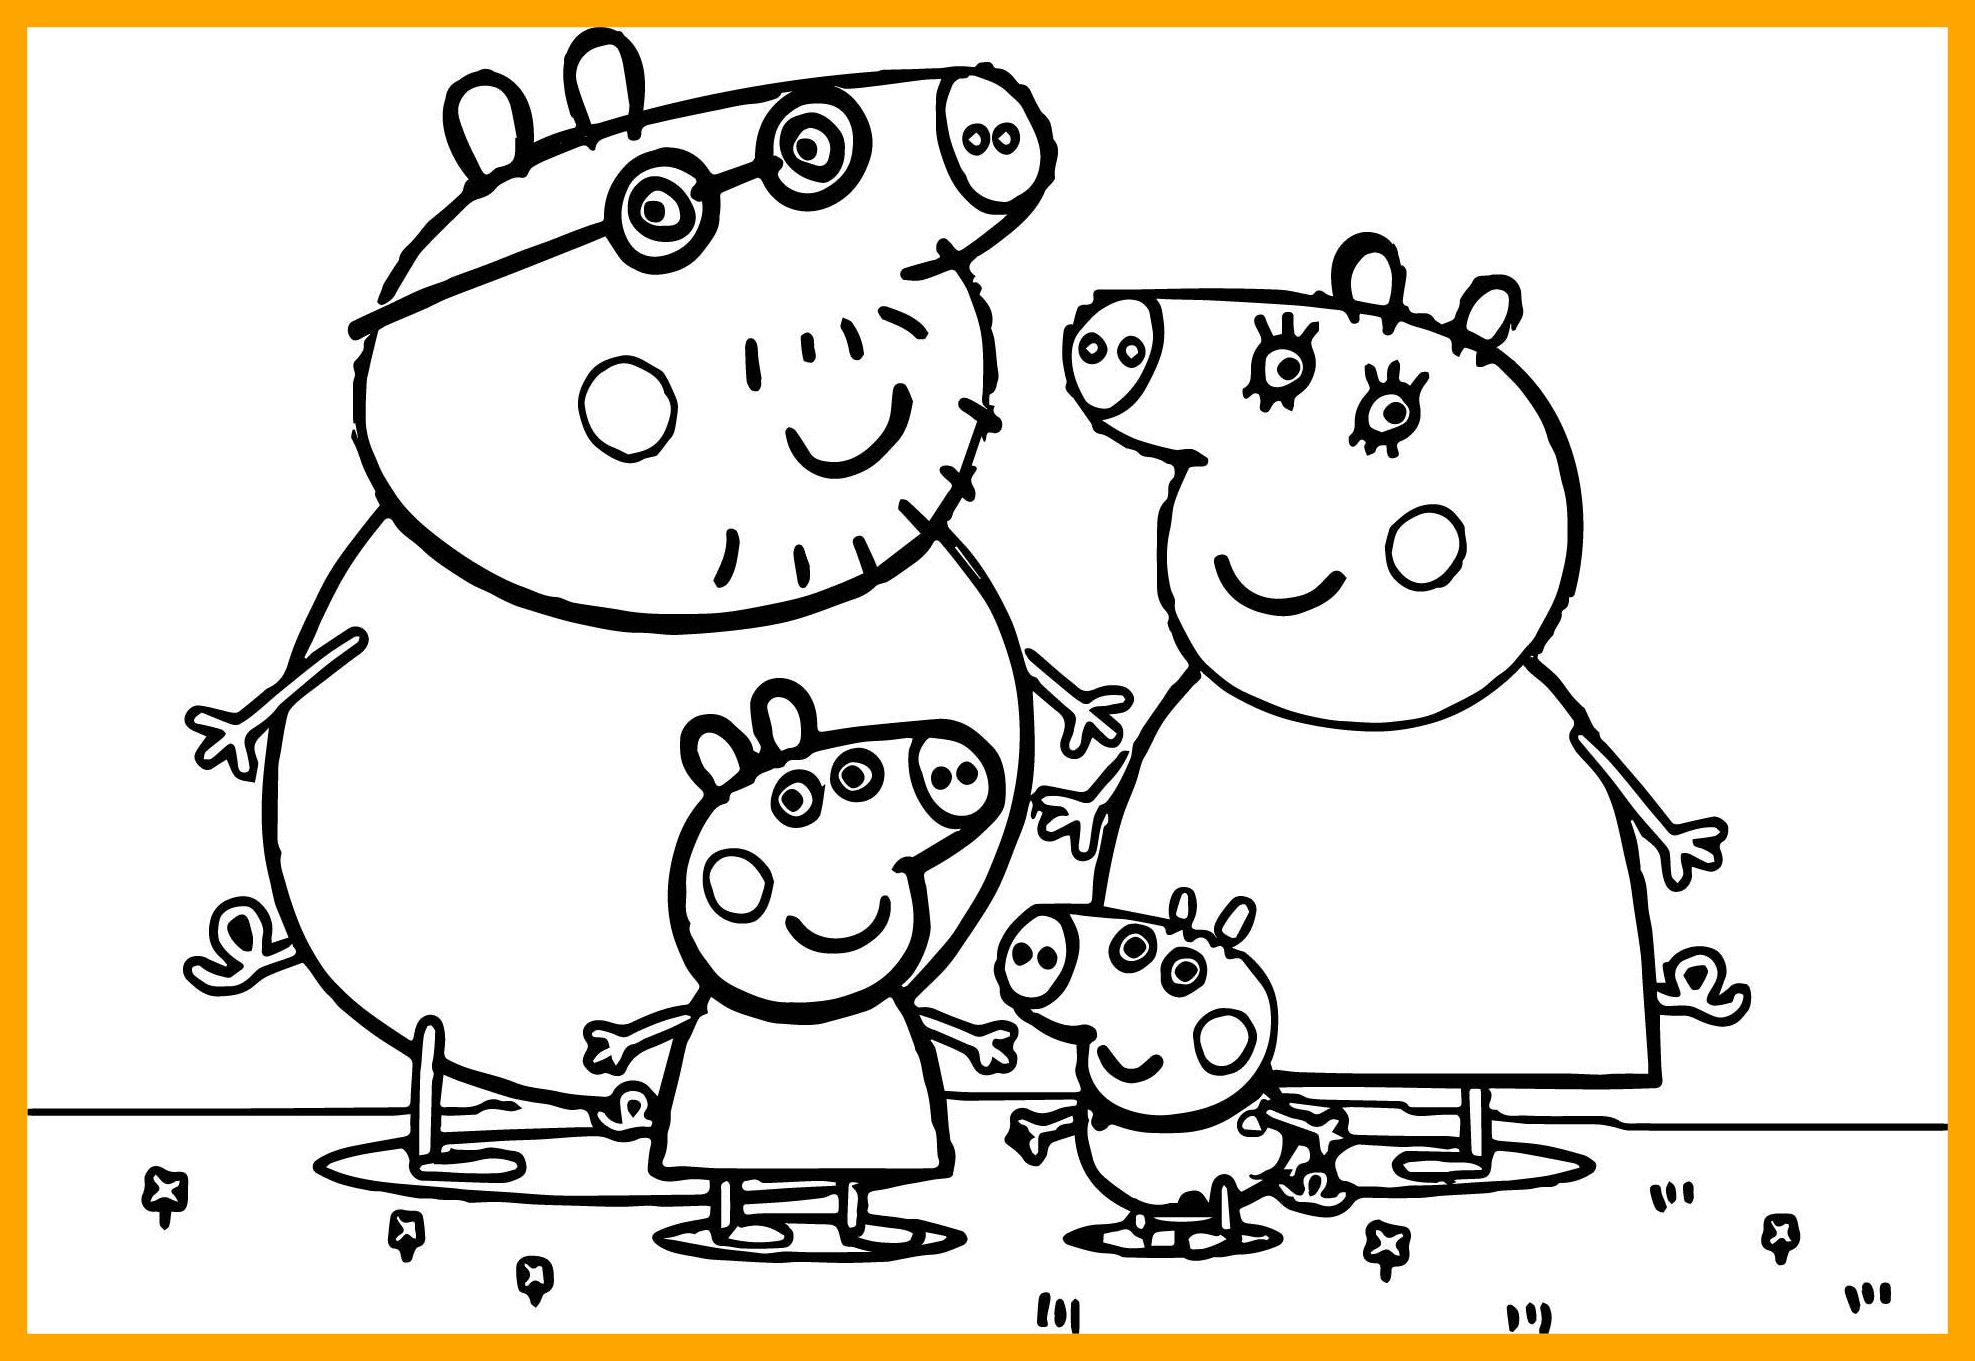 Peppa Pig Coloring Pages Online at GetColorings.com | Free printable